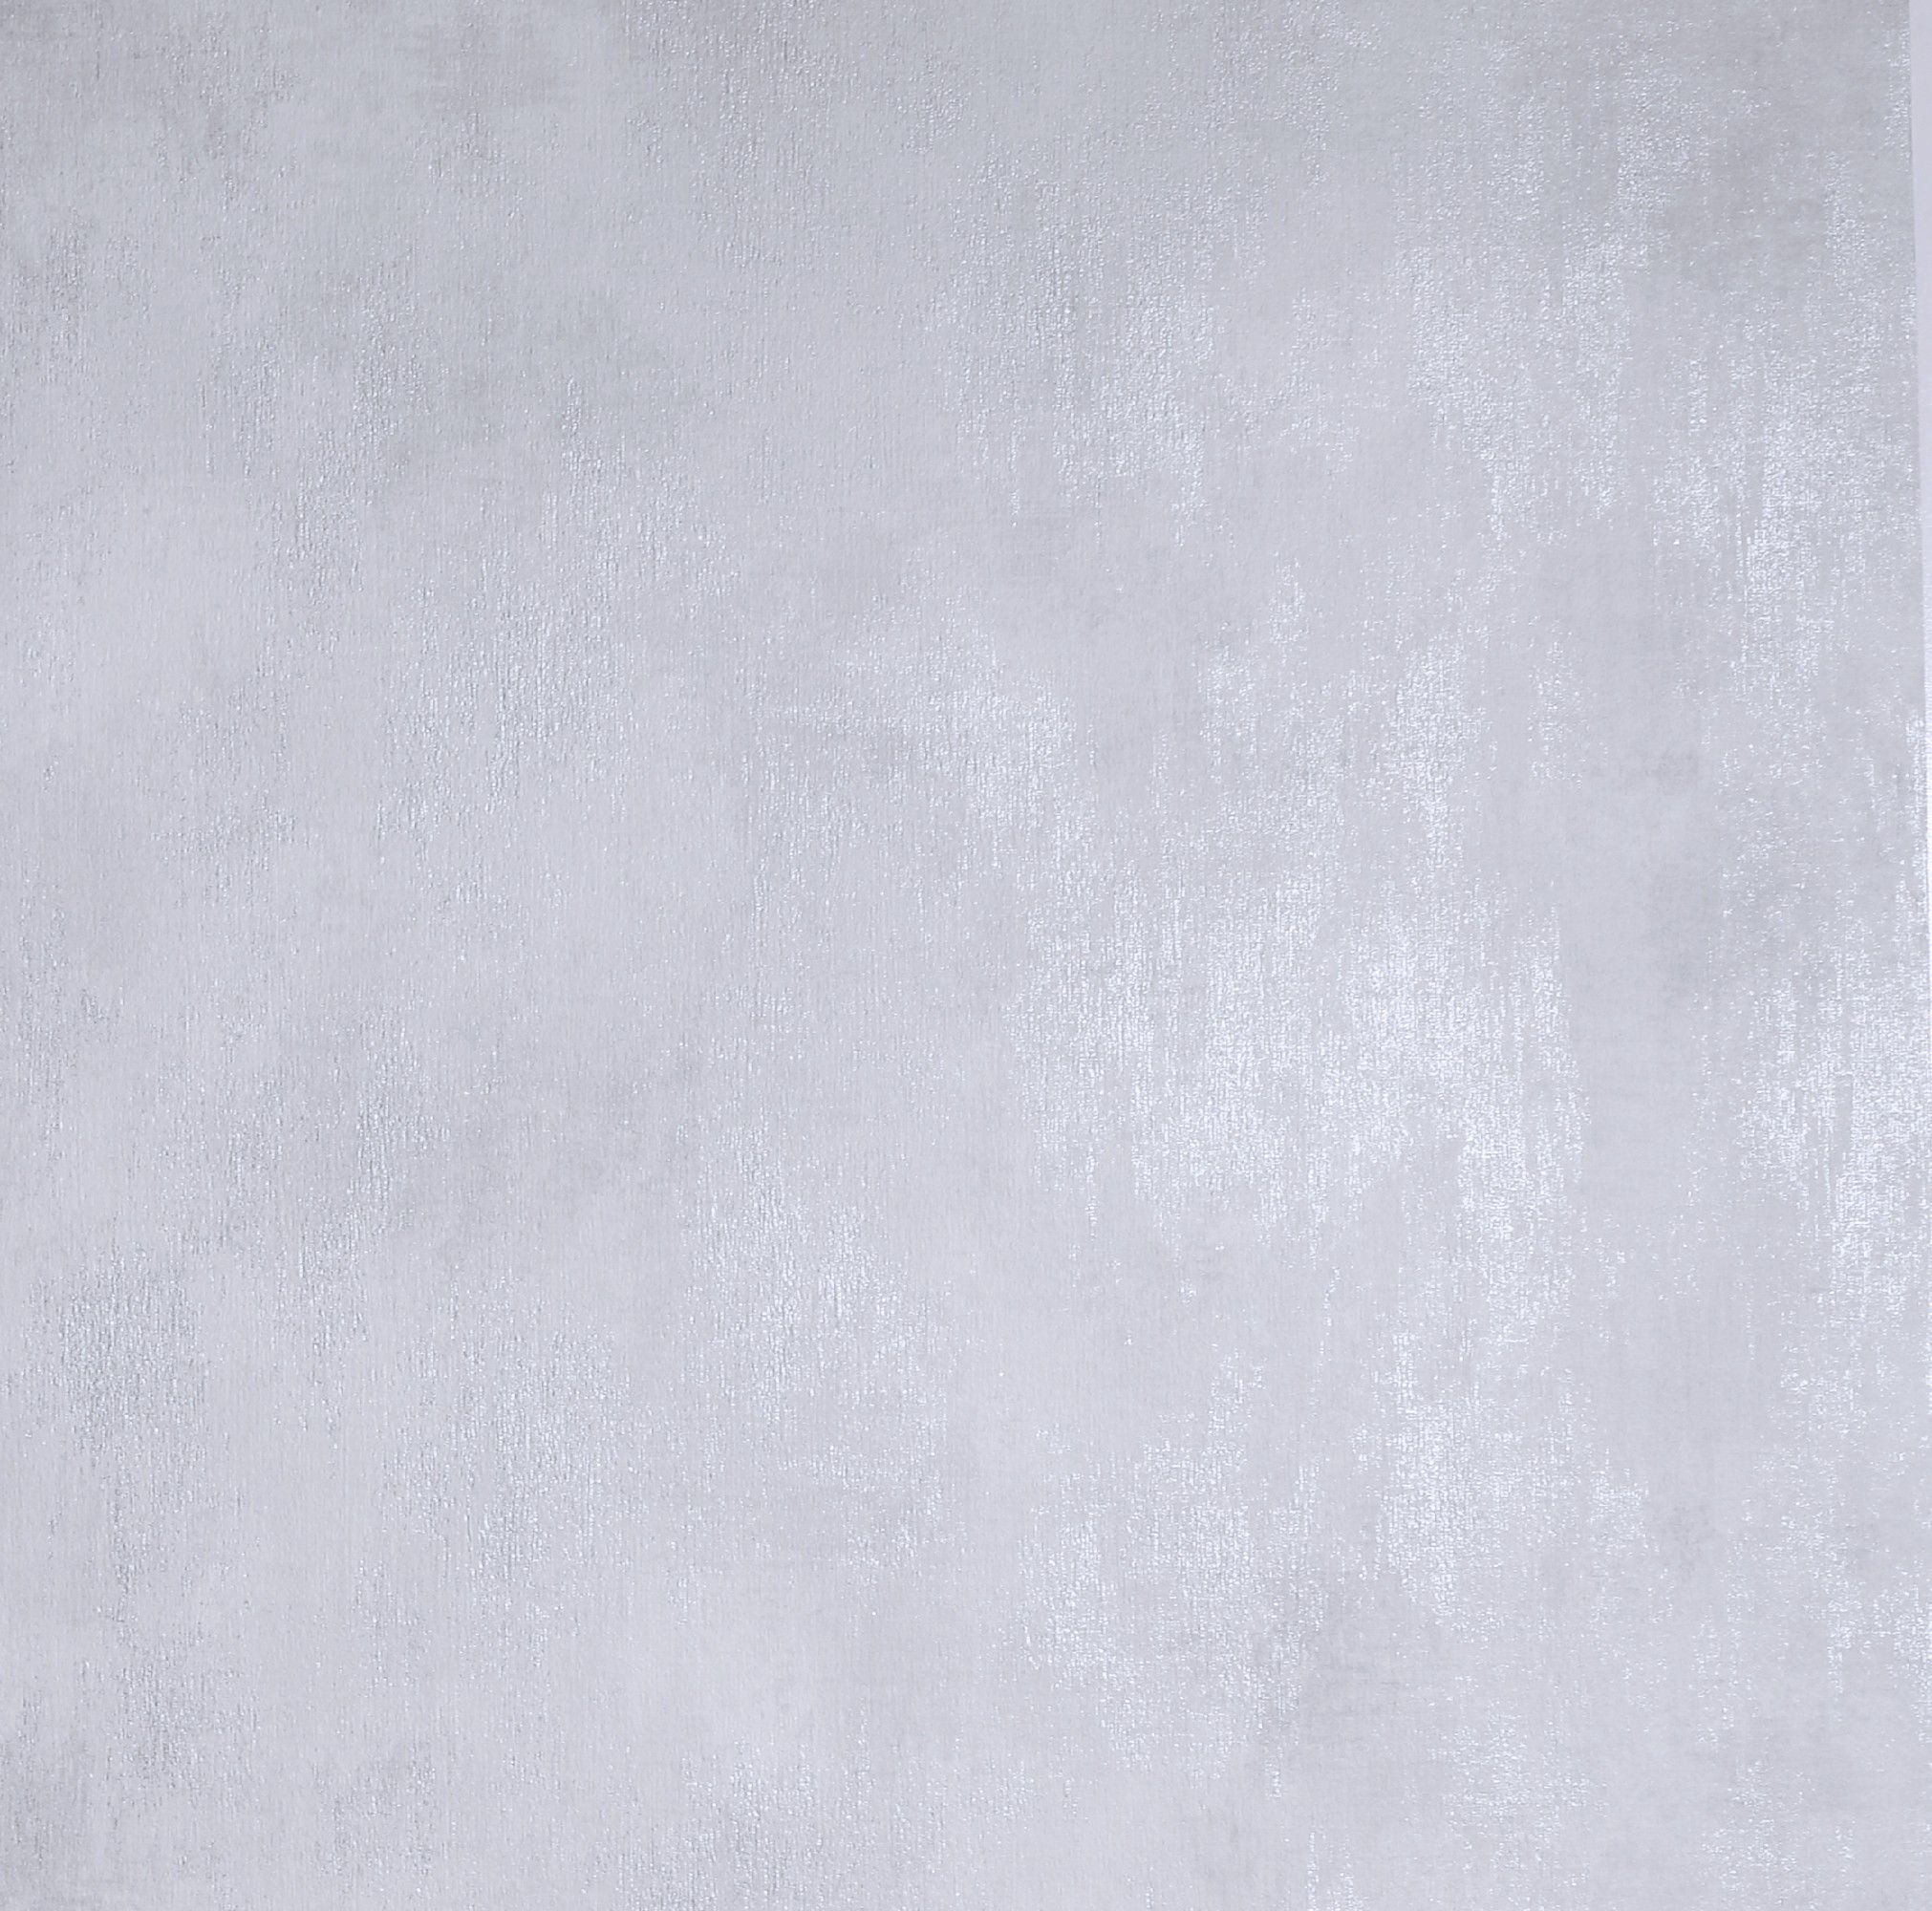 Arthouse Brushed Texture Grey Wallpaper - 10.05m x 53cm